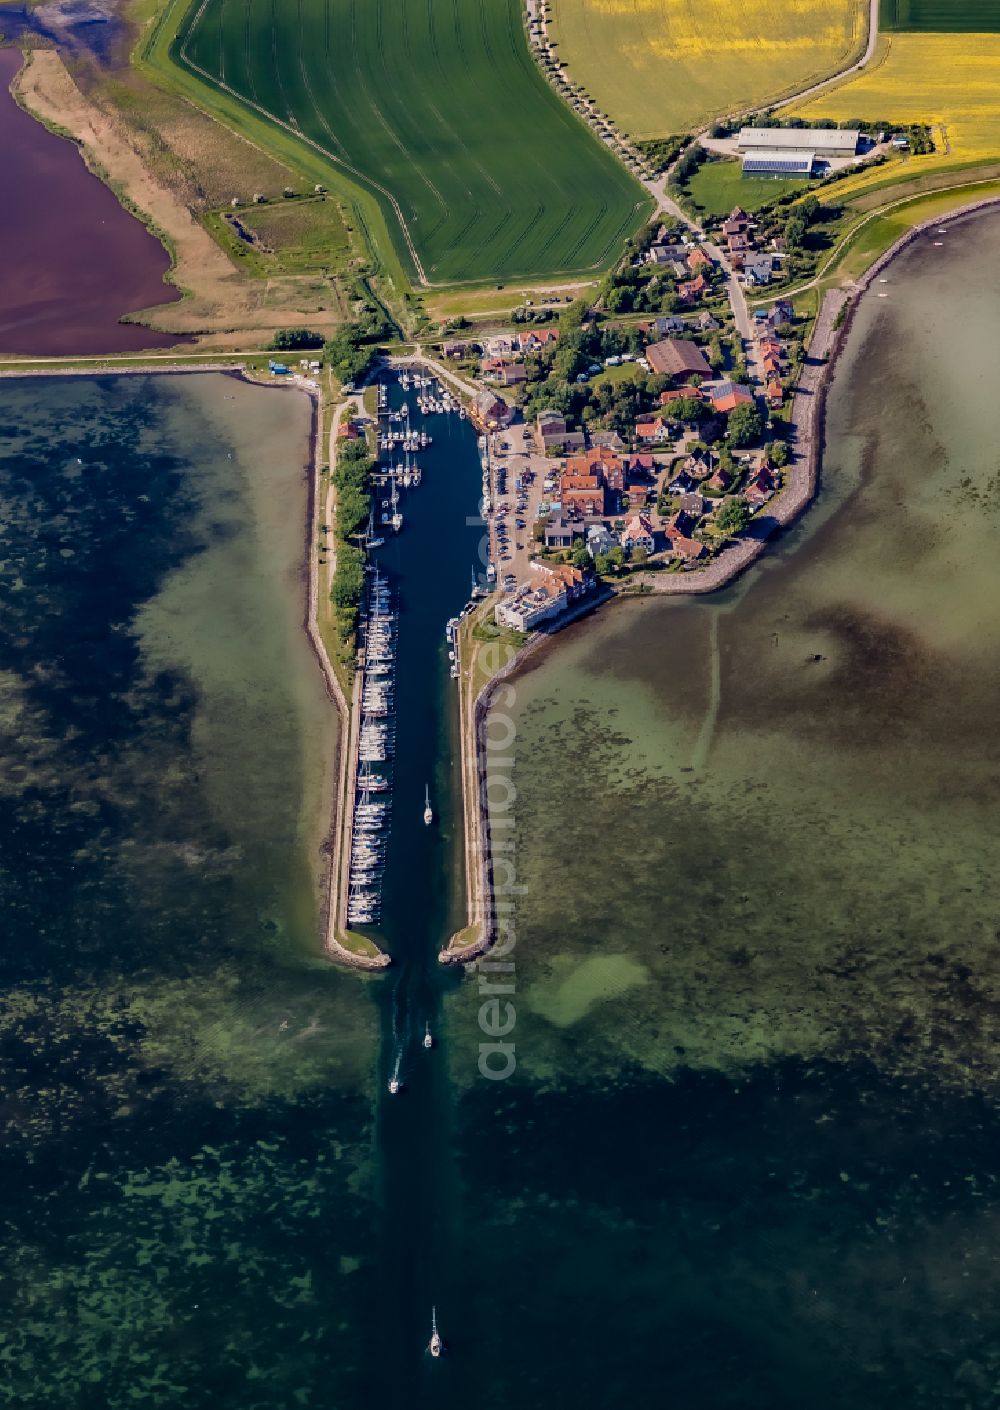 Fehmarn from the bird's eye view: Village center on the coastal area of the Baltic Sea in Orth auf Fehmarn in the state Schleswig-Holstein, Germany. The port and fishing village is located on the Orth Bay in the western part of the island of Fehmarn